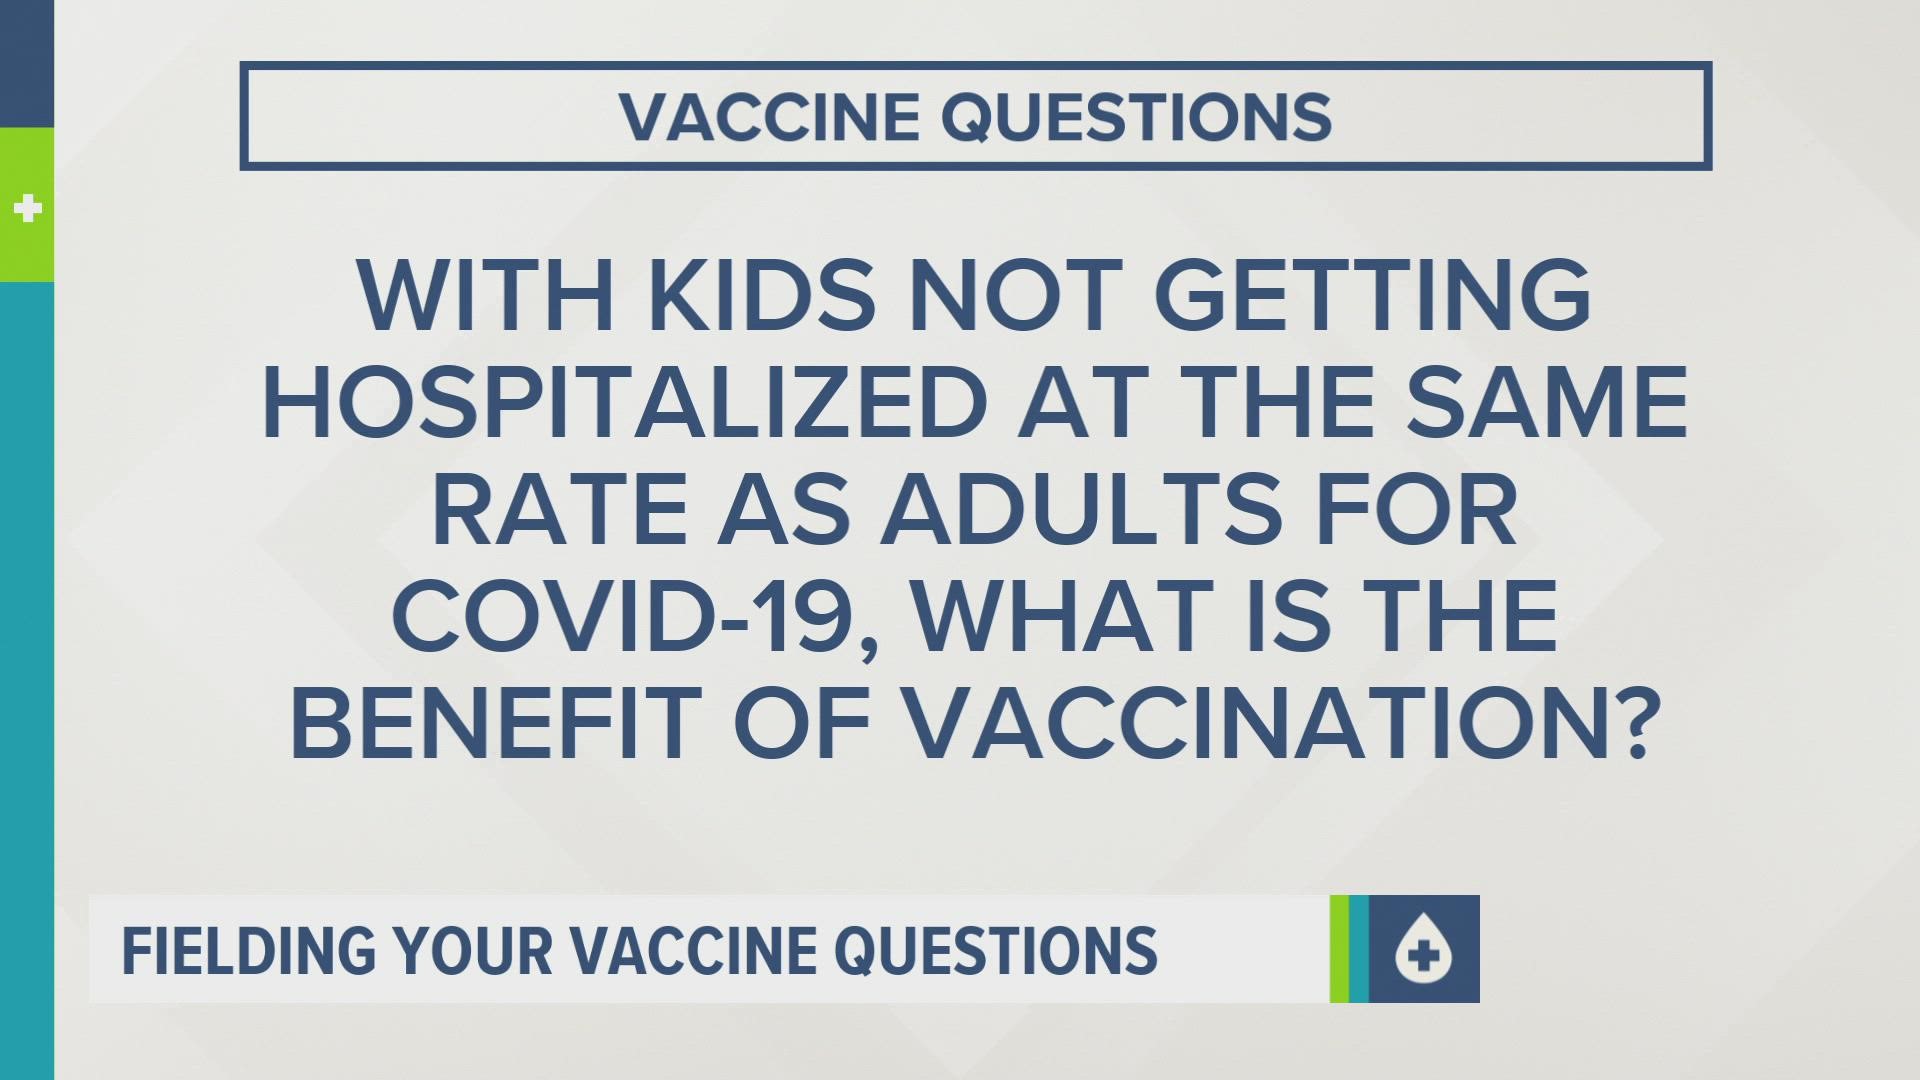 Have a question about pediatric COVID vaccines? Text us at 515-457-1026.